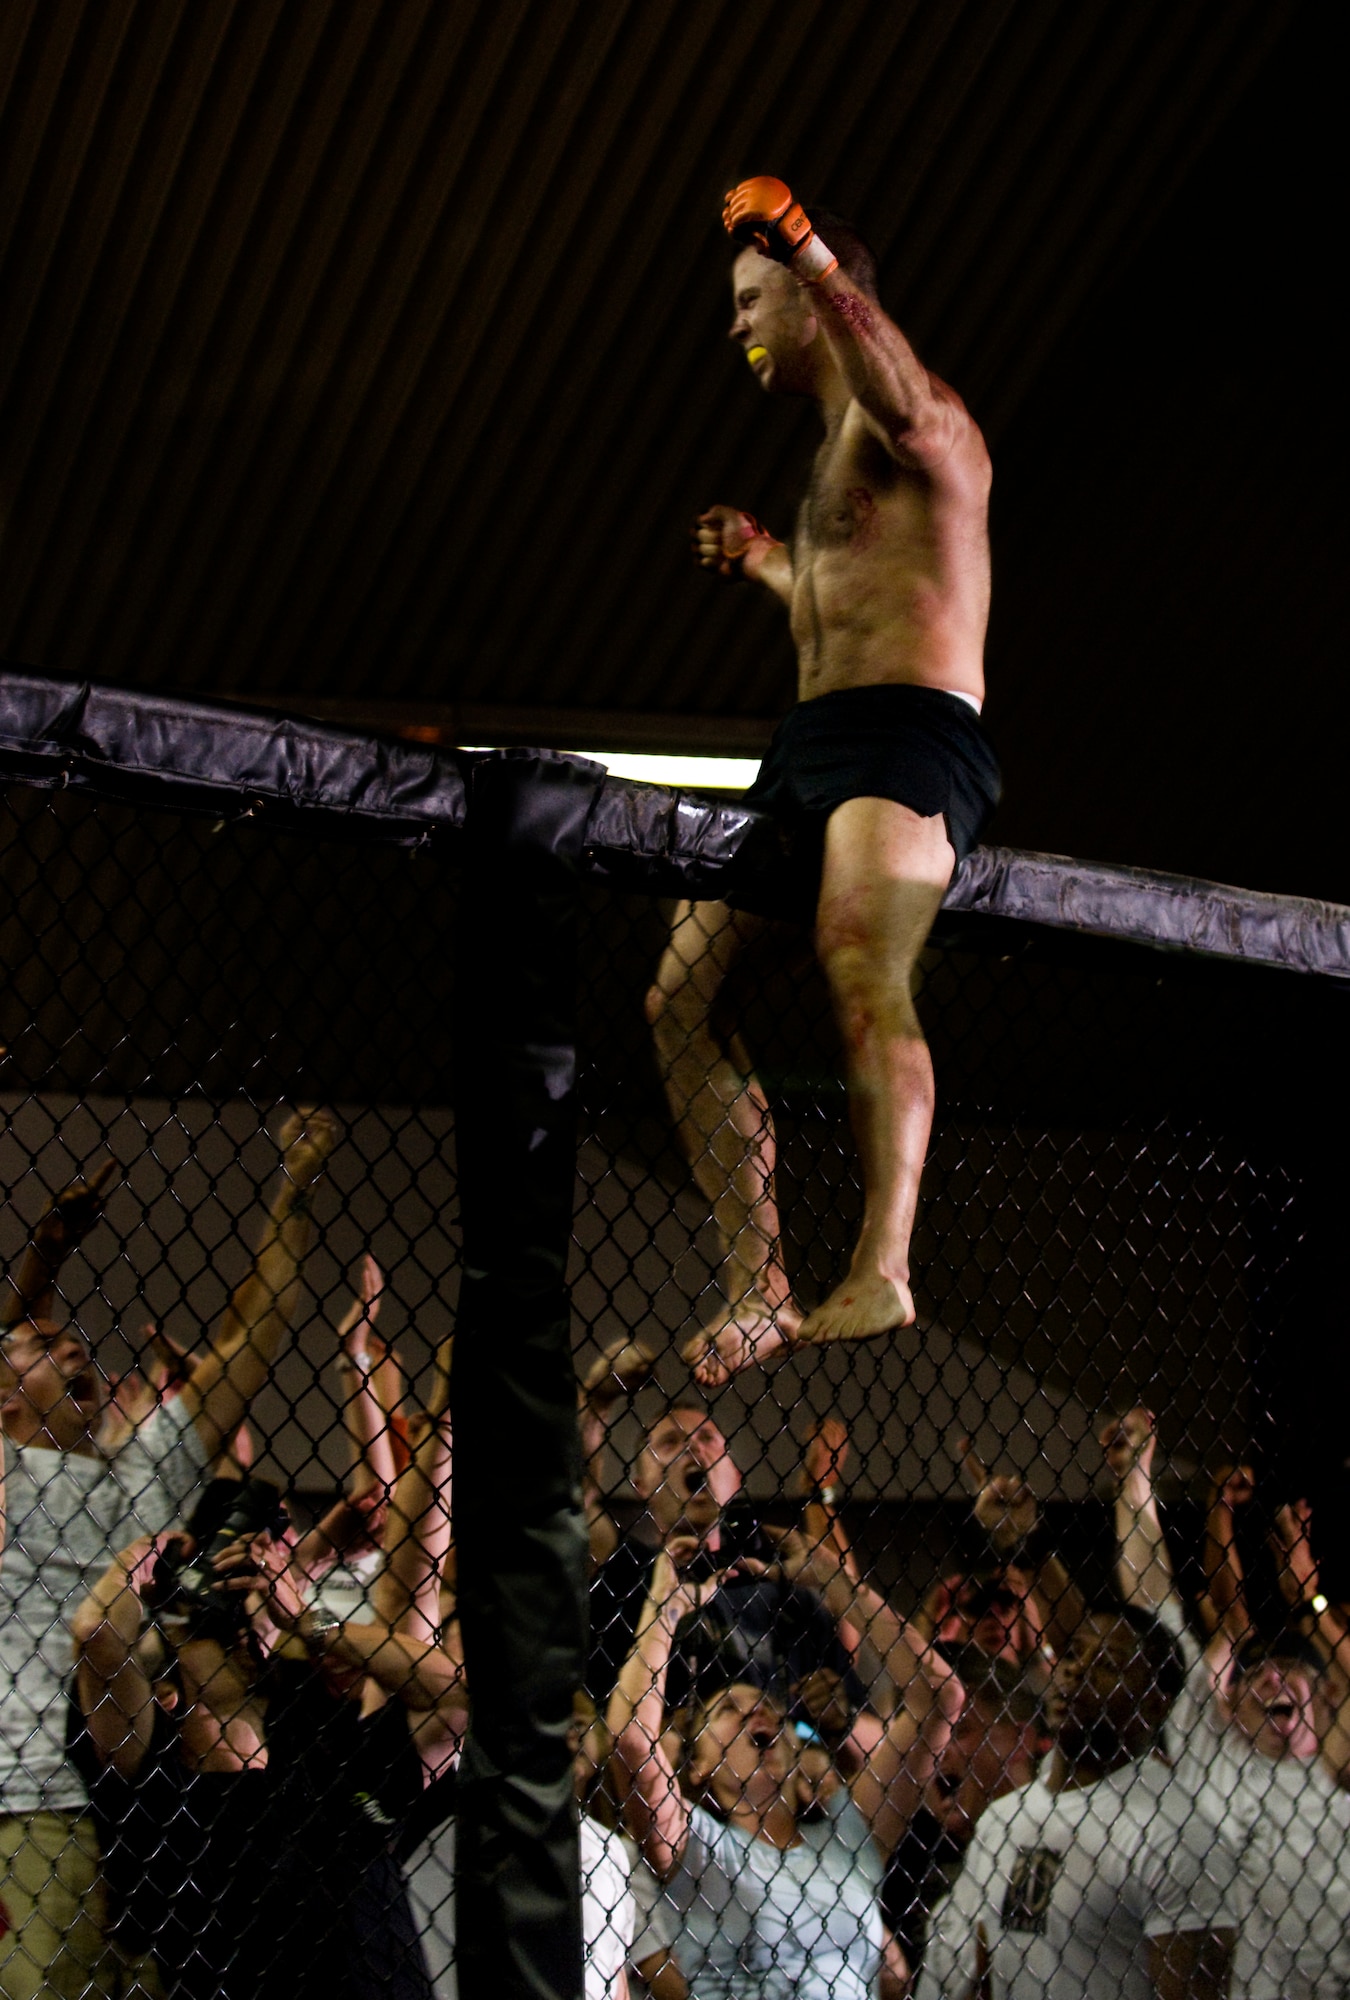 Bryan Onderdonk of Team Catacomb celebrates his win against Igor Montes of Germany, during his professional debut in mixed martial arts, July 11, 2009, Baumholder, Germany. Onderdonk is a staff sergeant with the 786th Security Forces Squadron at Sembach Annex, Germany. (U.S. Air Force photo by Senior Airman Nathan Lipscomb)